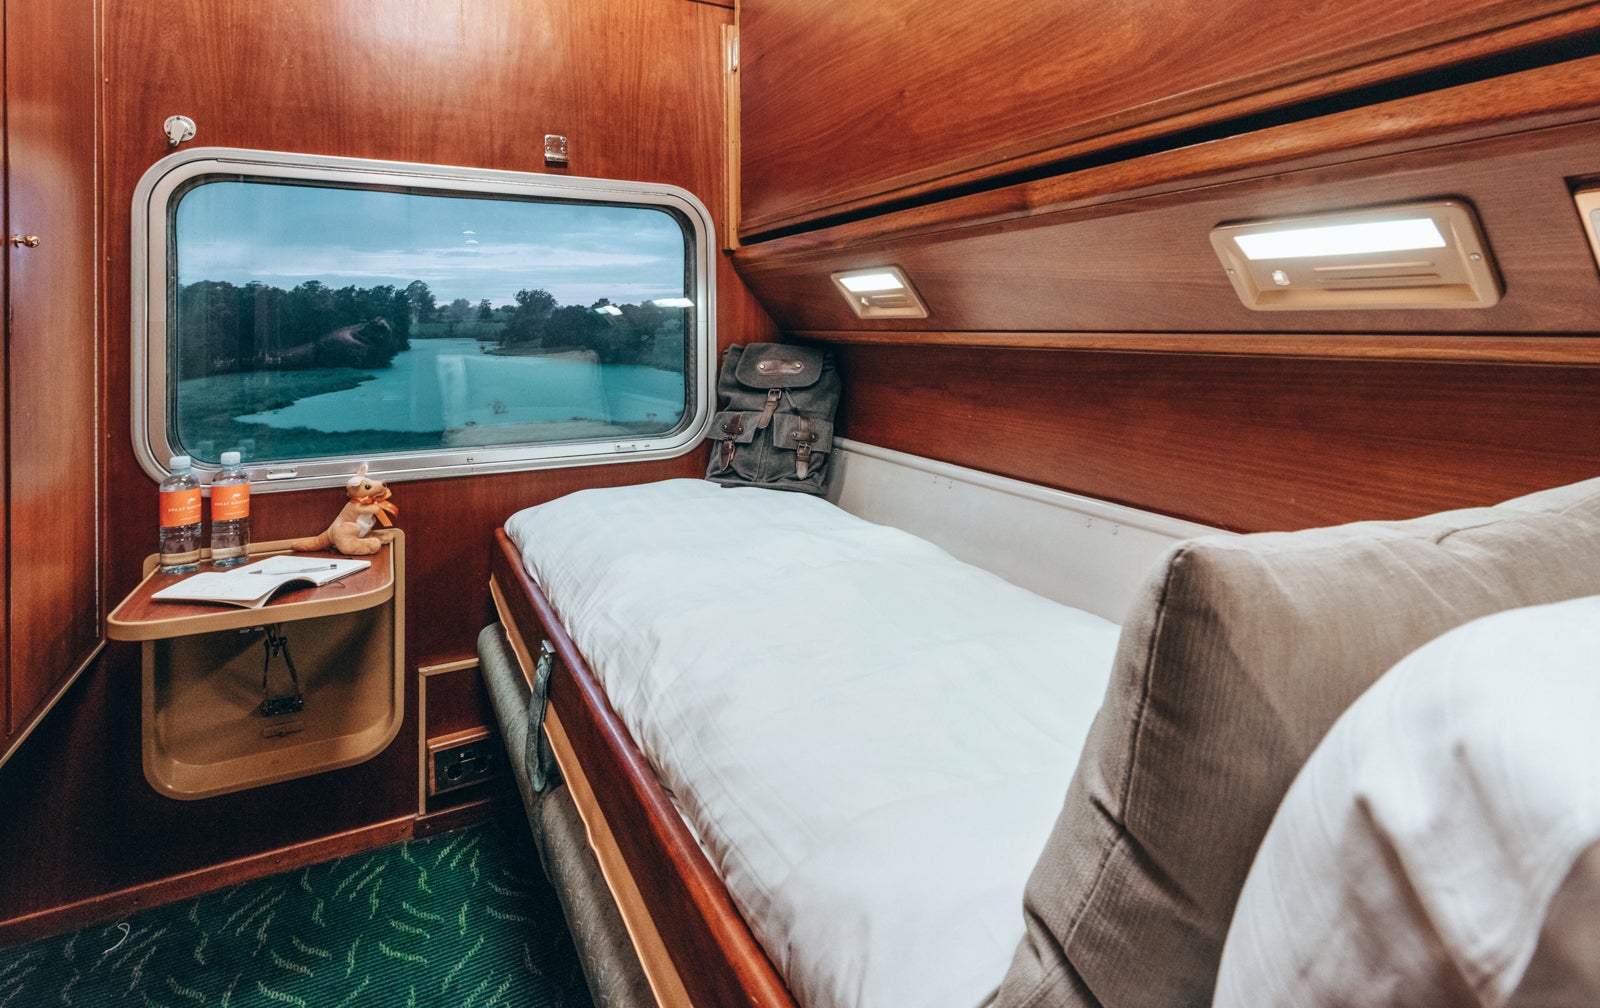 How to do a luxury train journey – for less